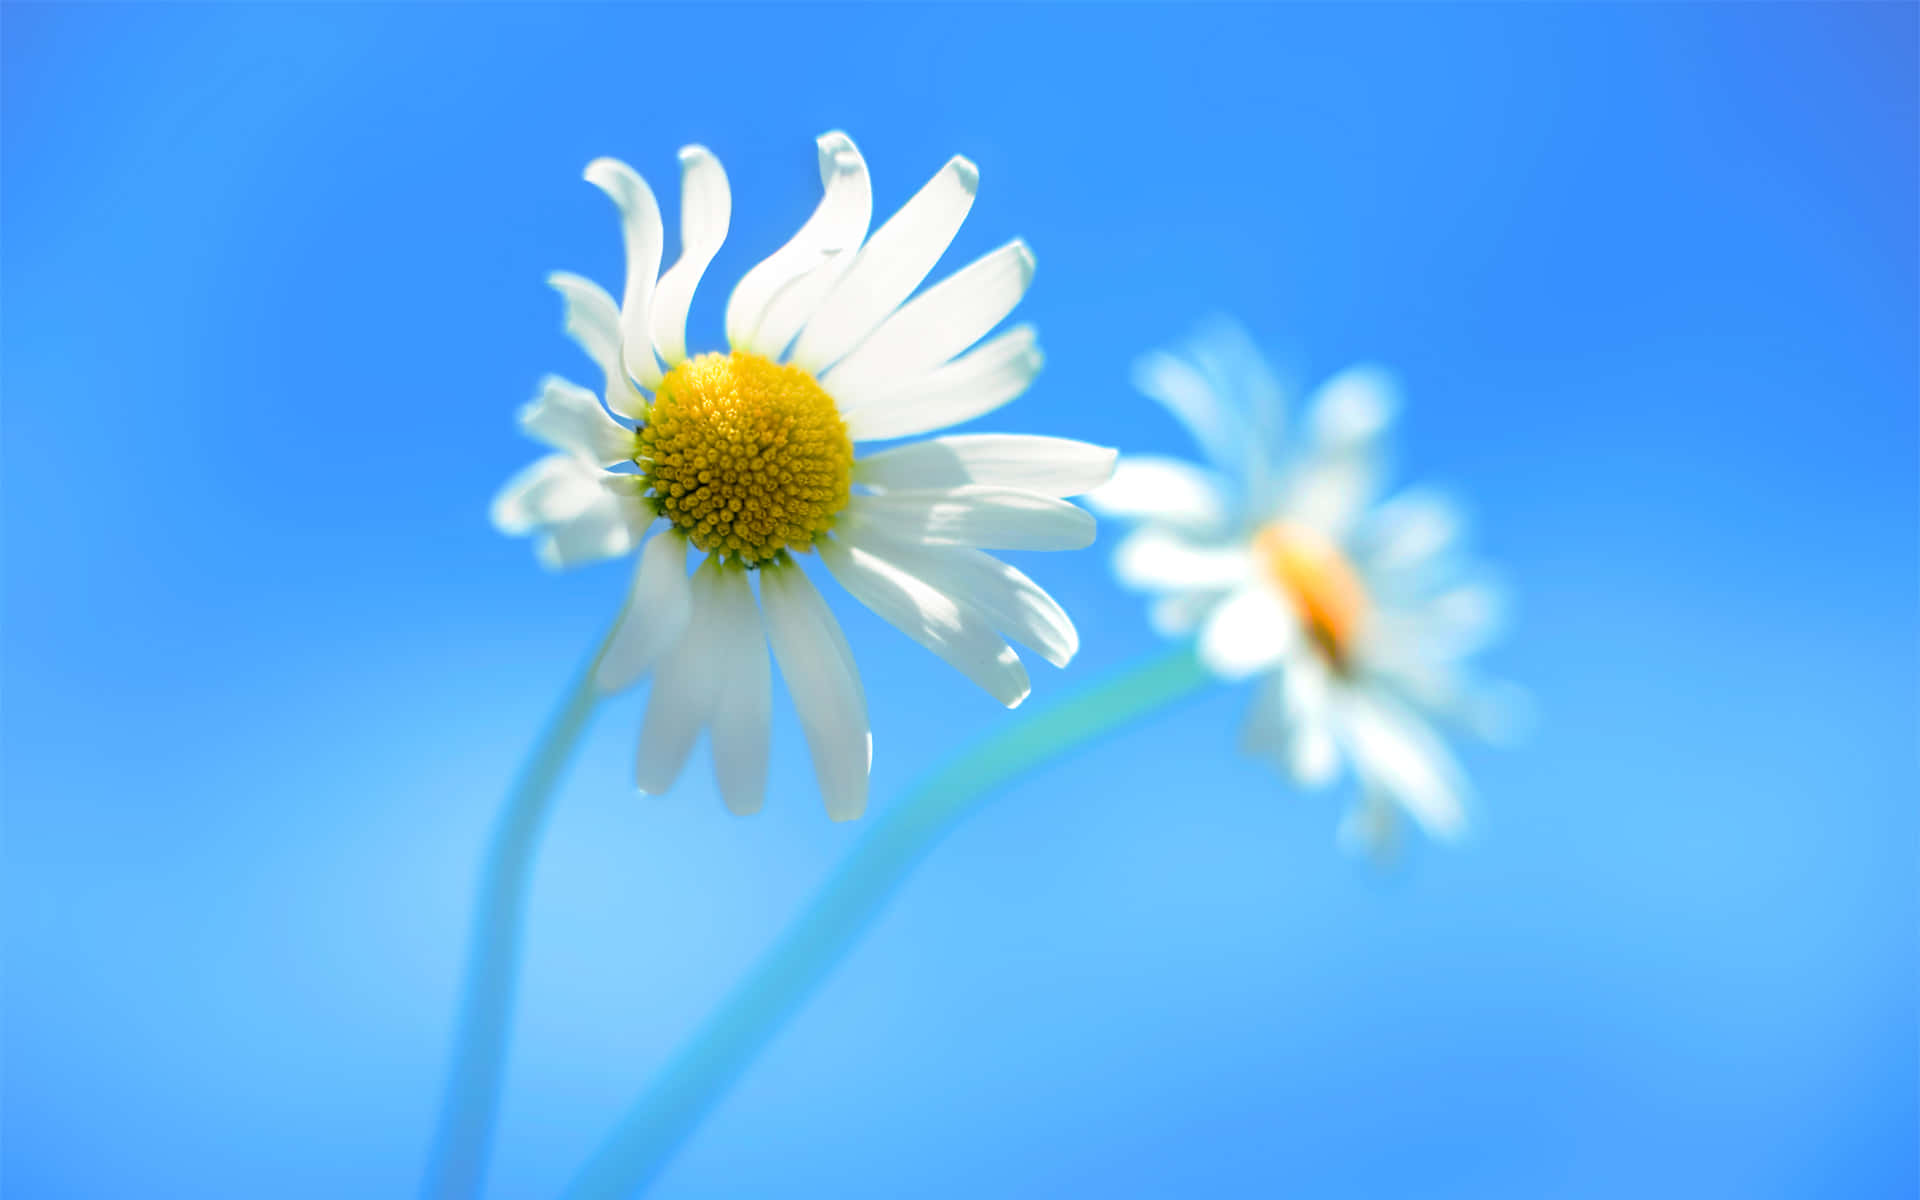 A yellow-white daisy blossoming against a grey sky